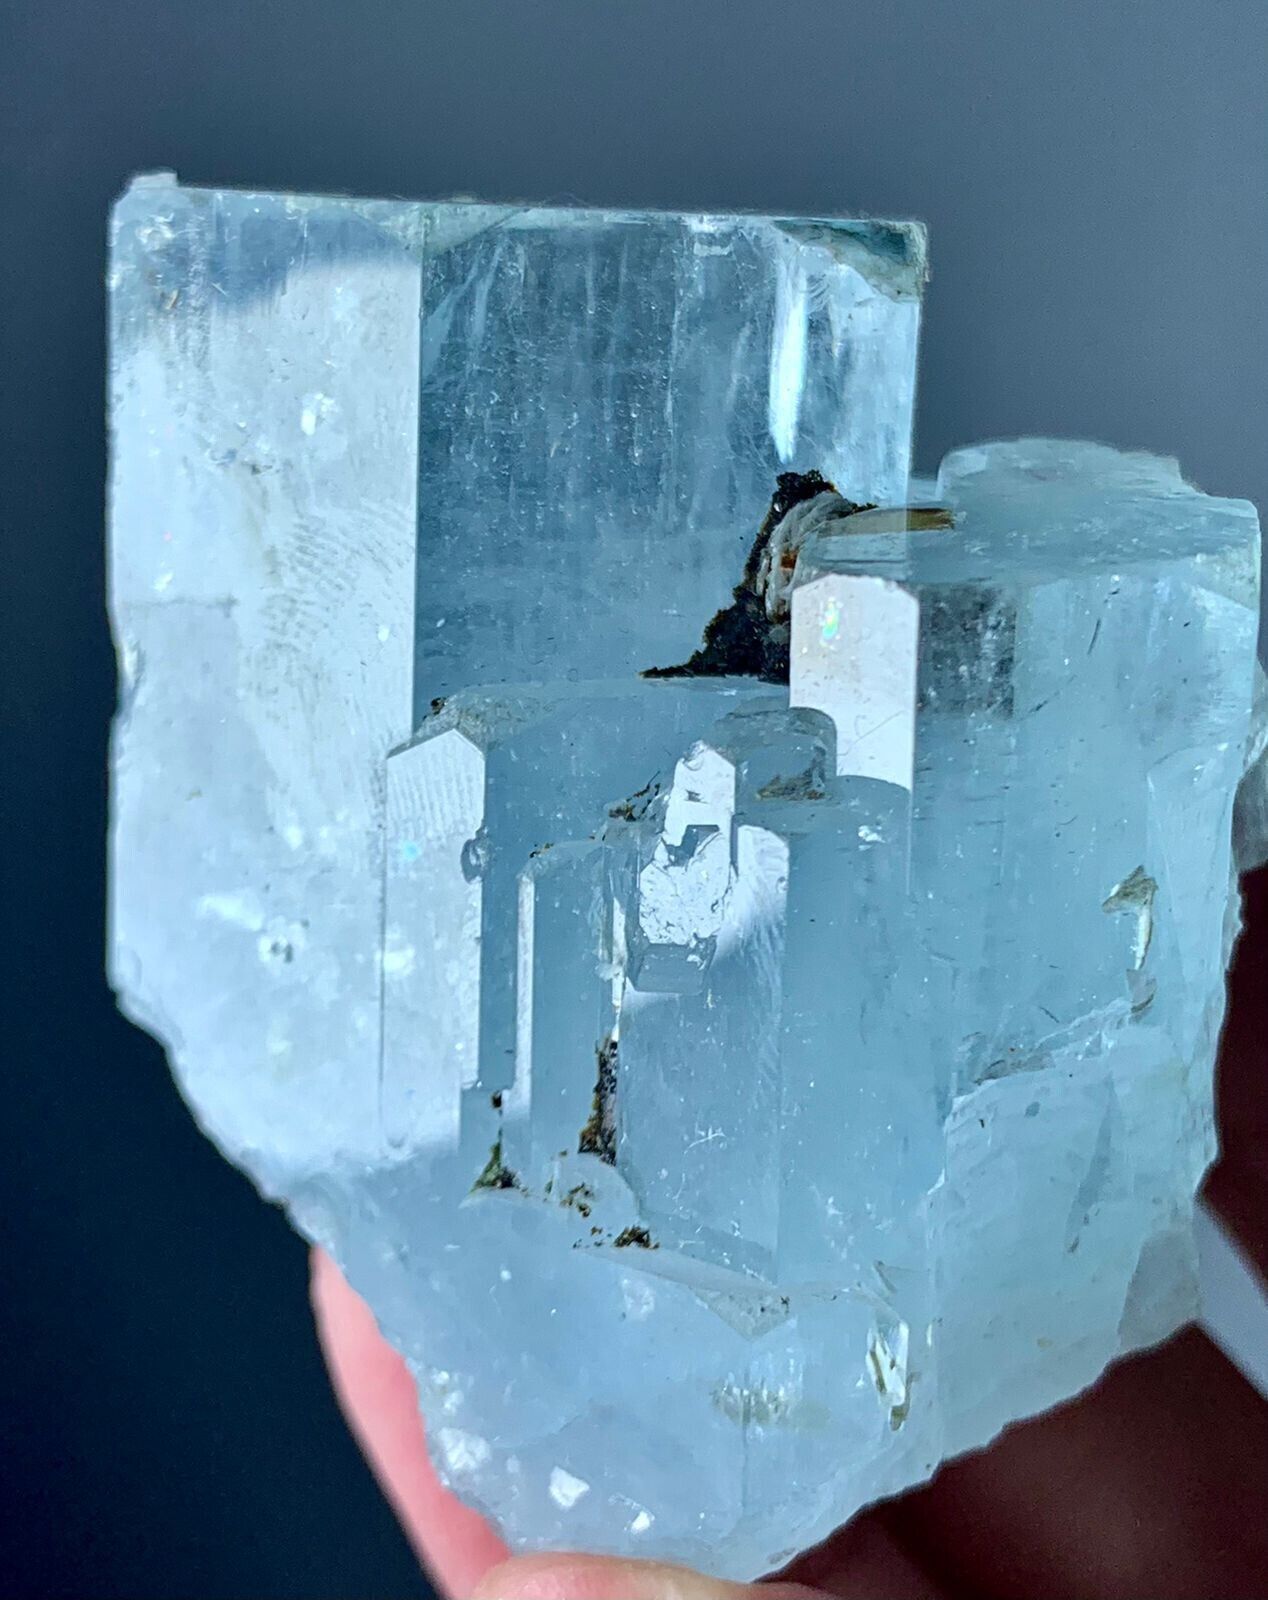 420 Cts Top Quality Terminated Aquamarine Crystal from Skardu Pakistan